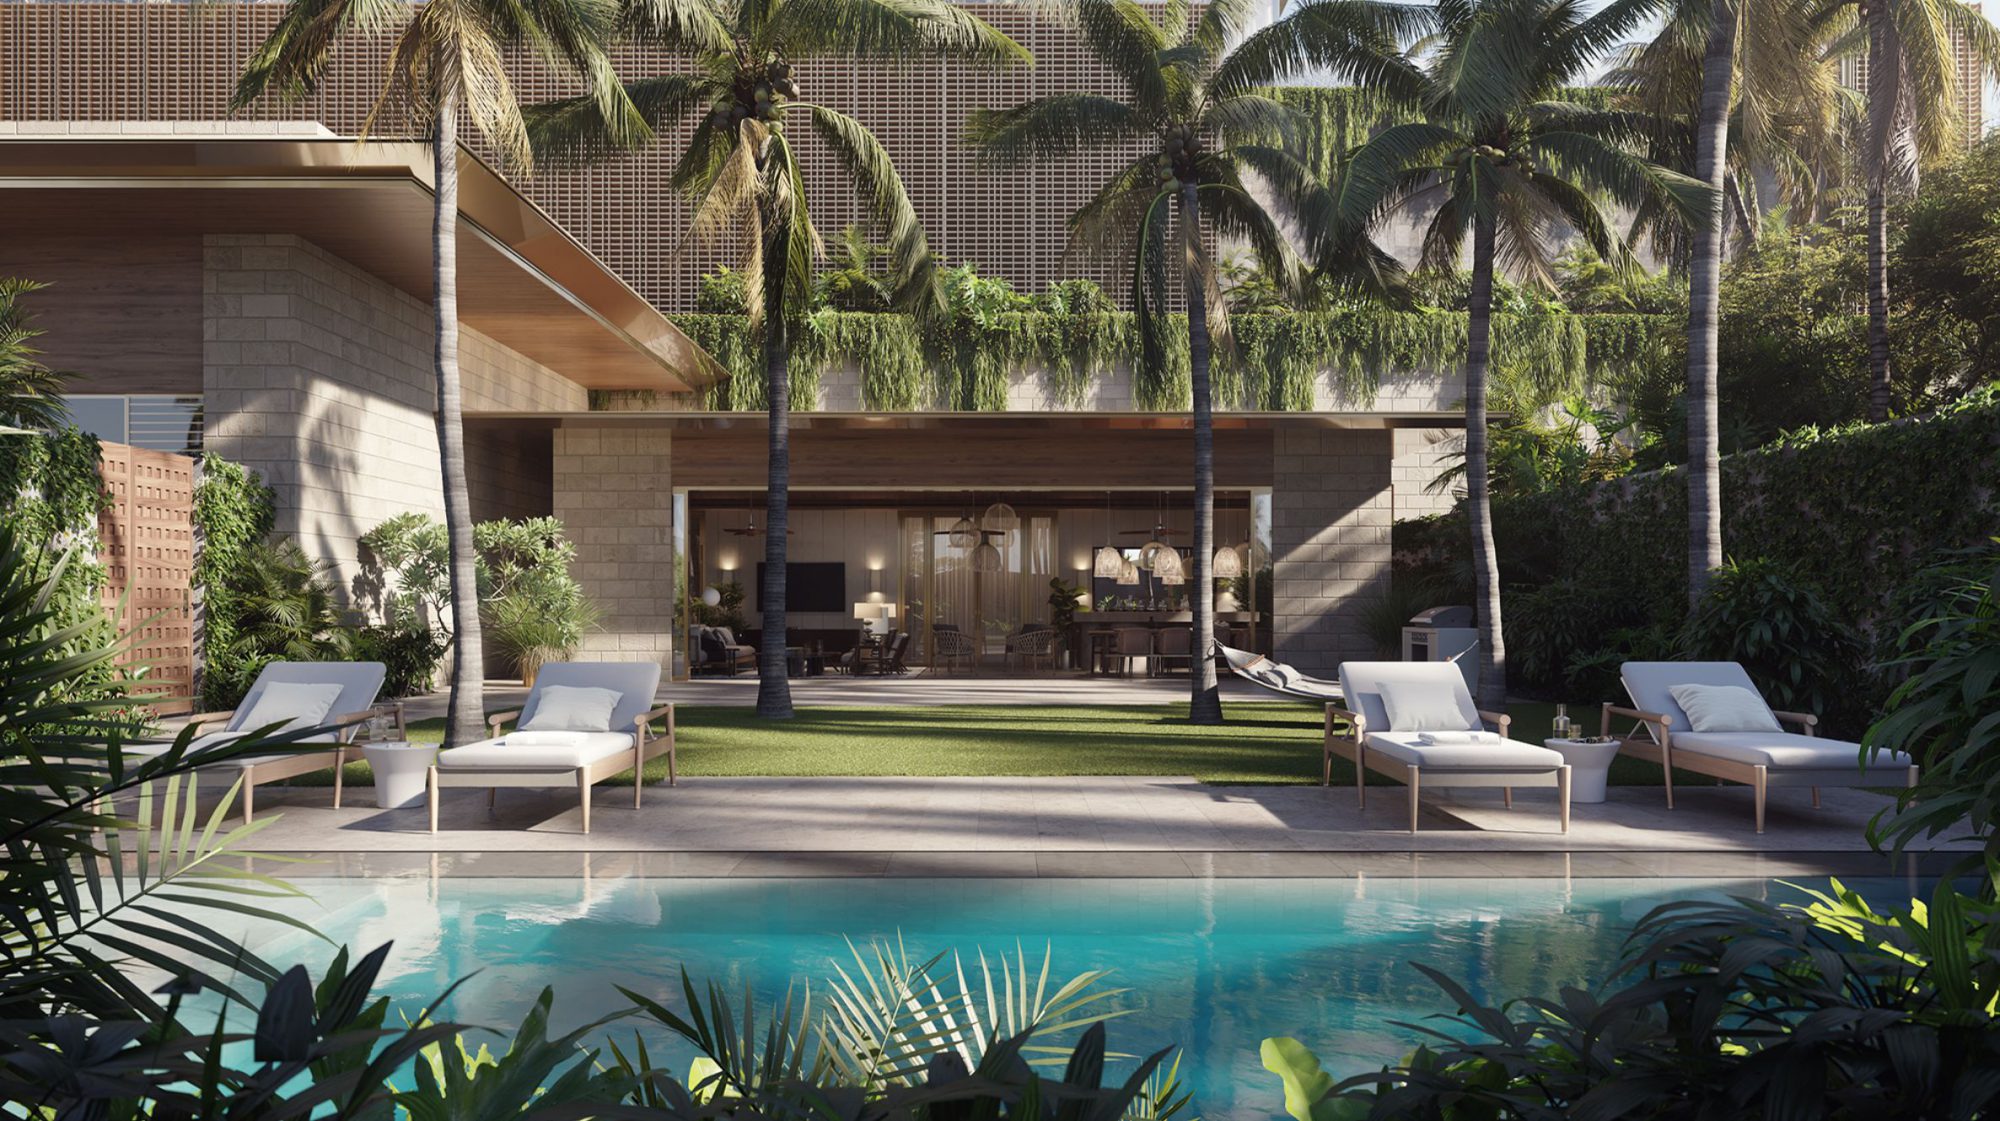 Exterior of the Lauhala Pool House, featuring a pool, poolside seating, and an a indoor-outdoor gathering space